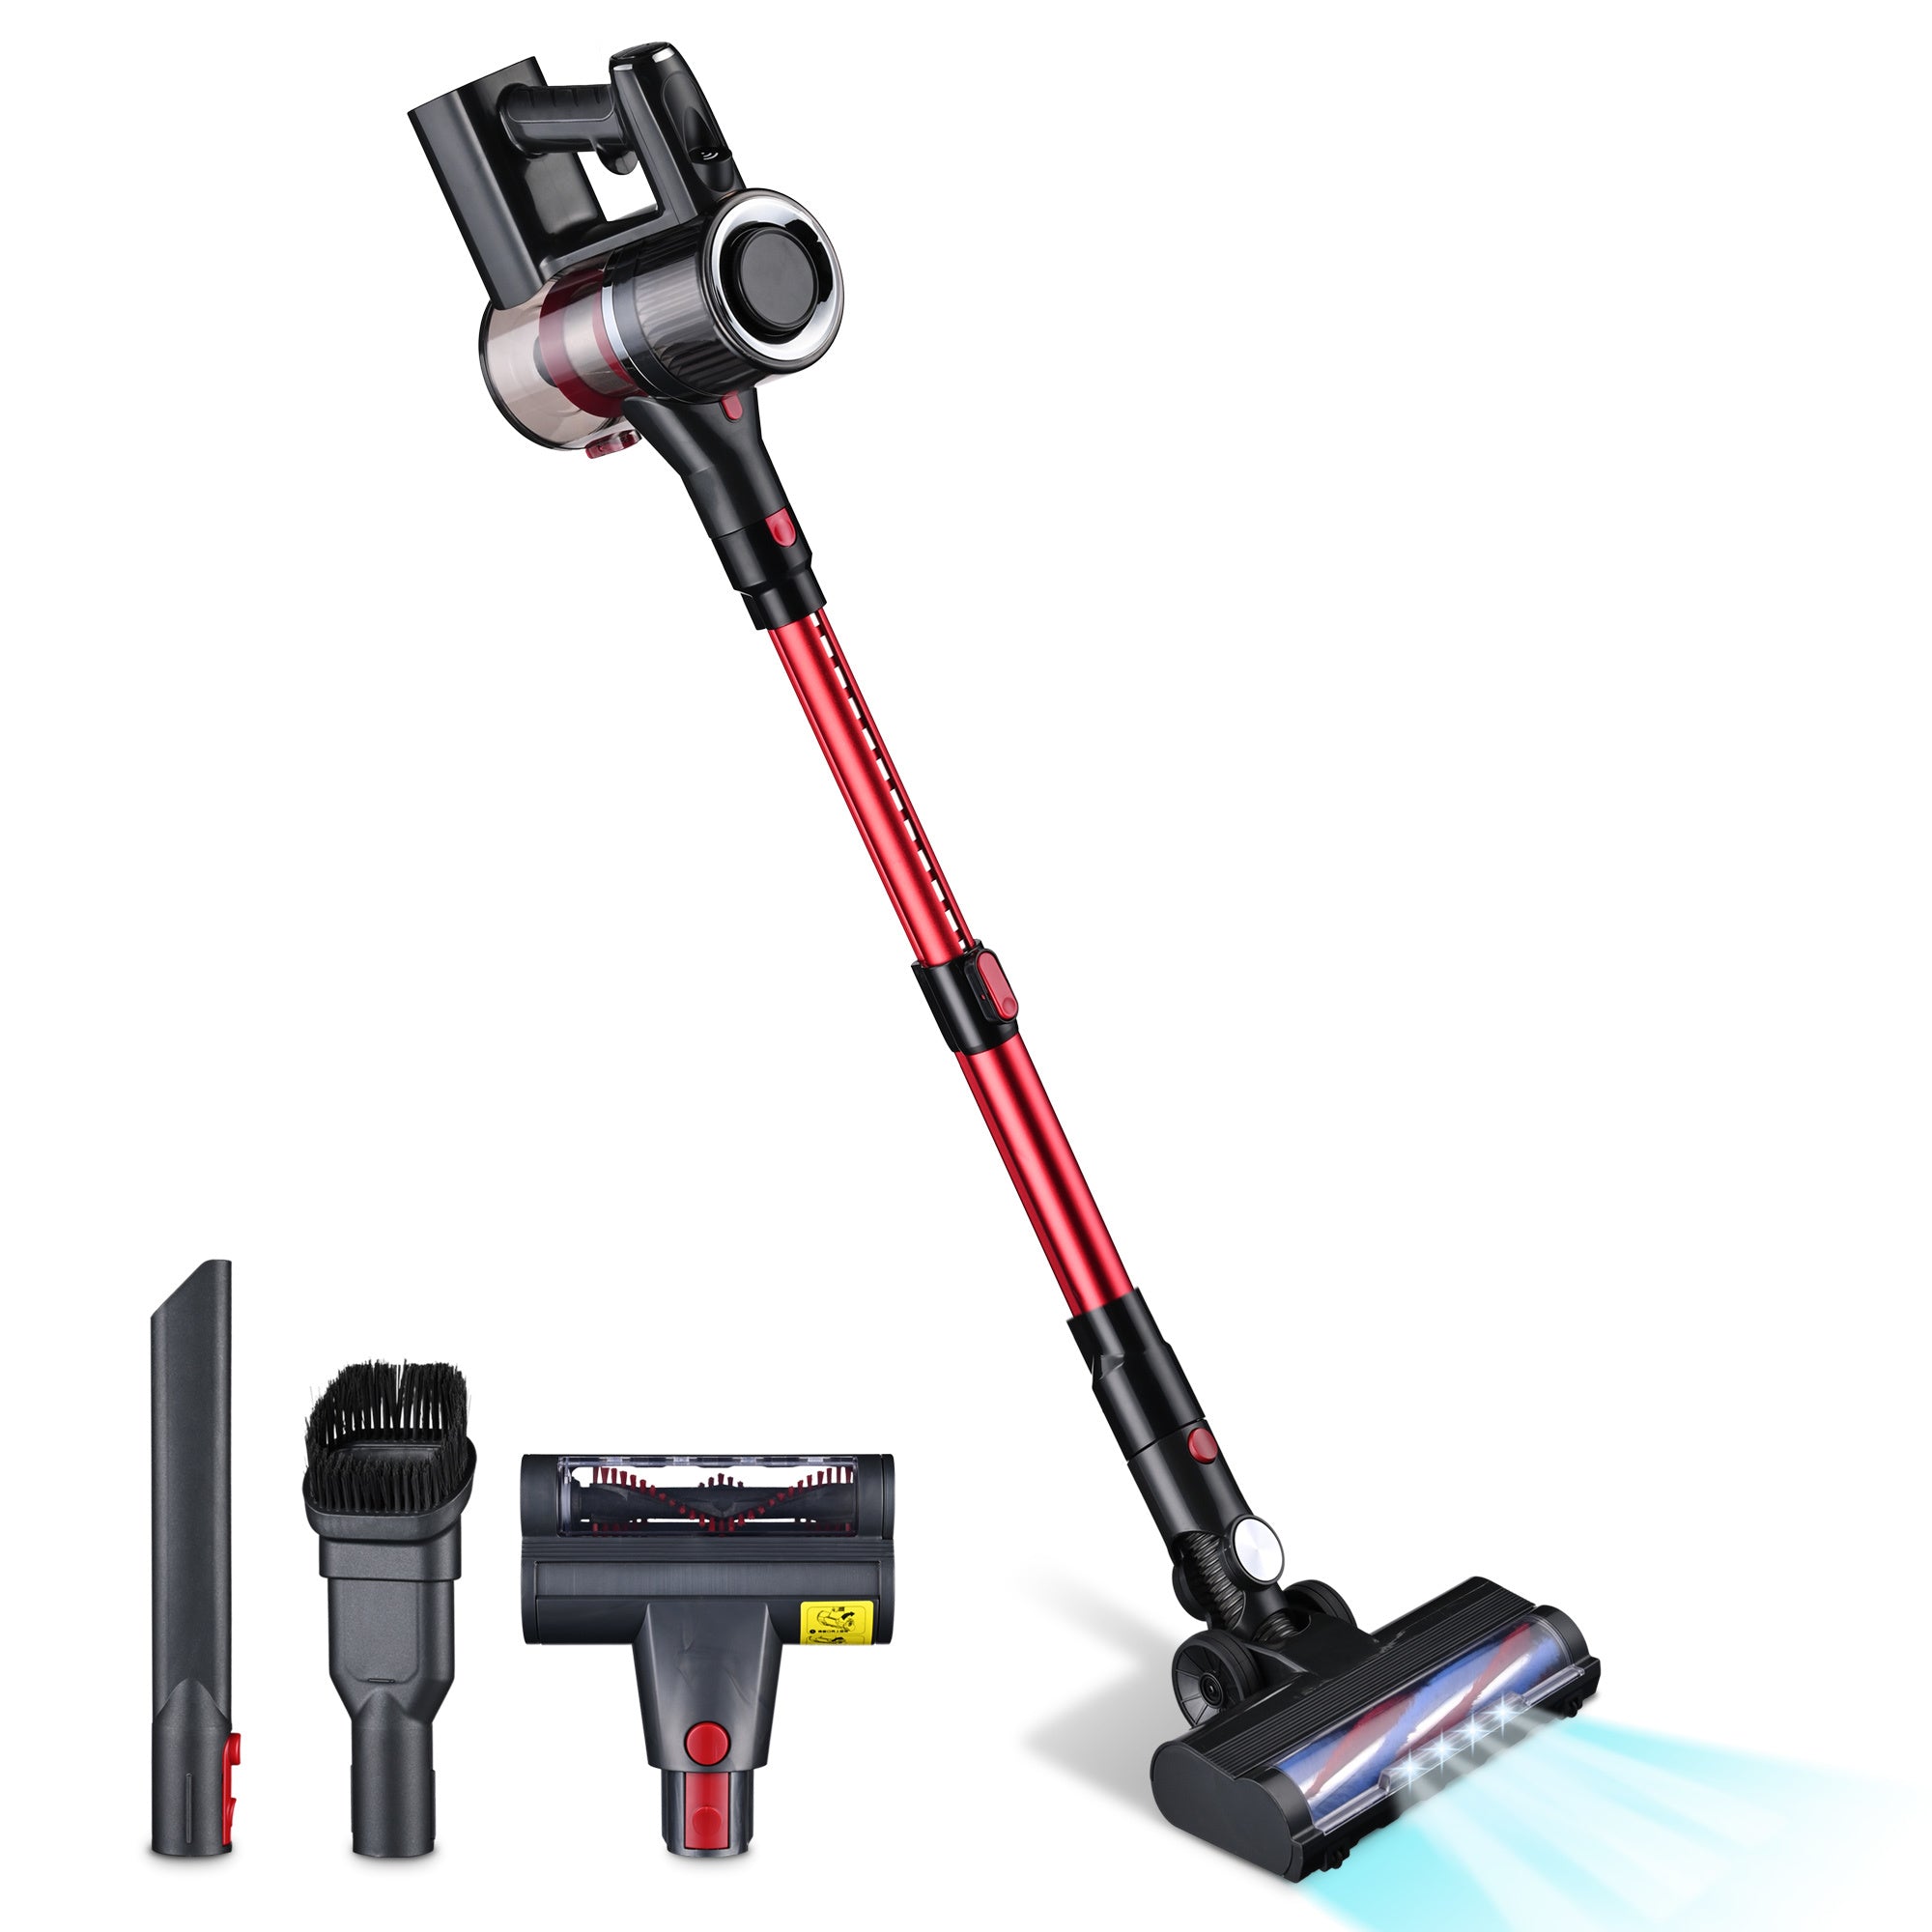 A whall 25kPa Suction 4 in 1 Foldable Cordless Stick Vacuum Cleaner with different attachments.